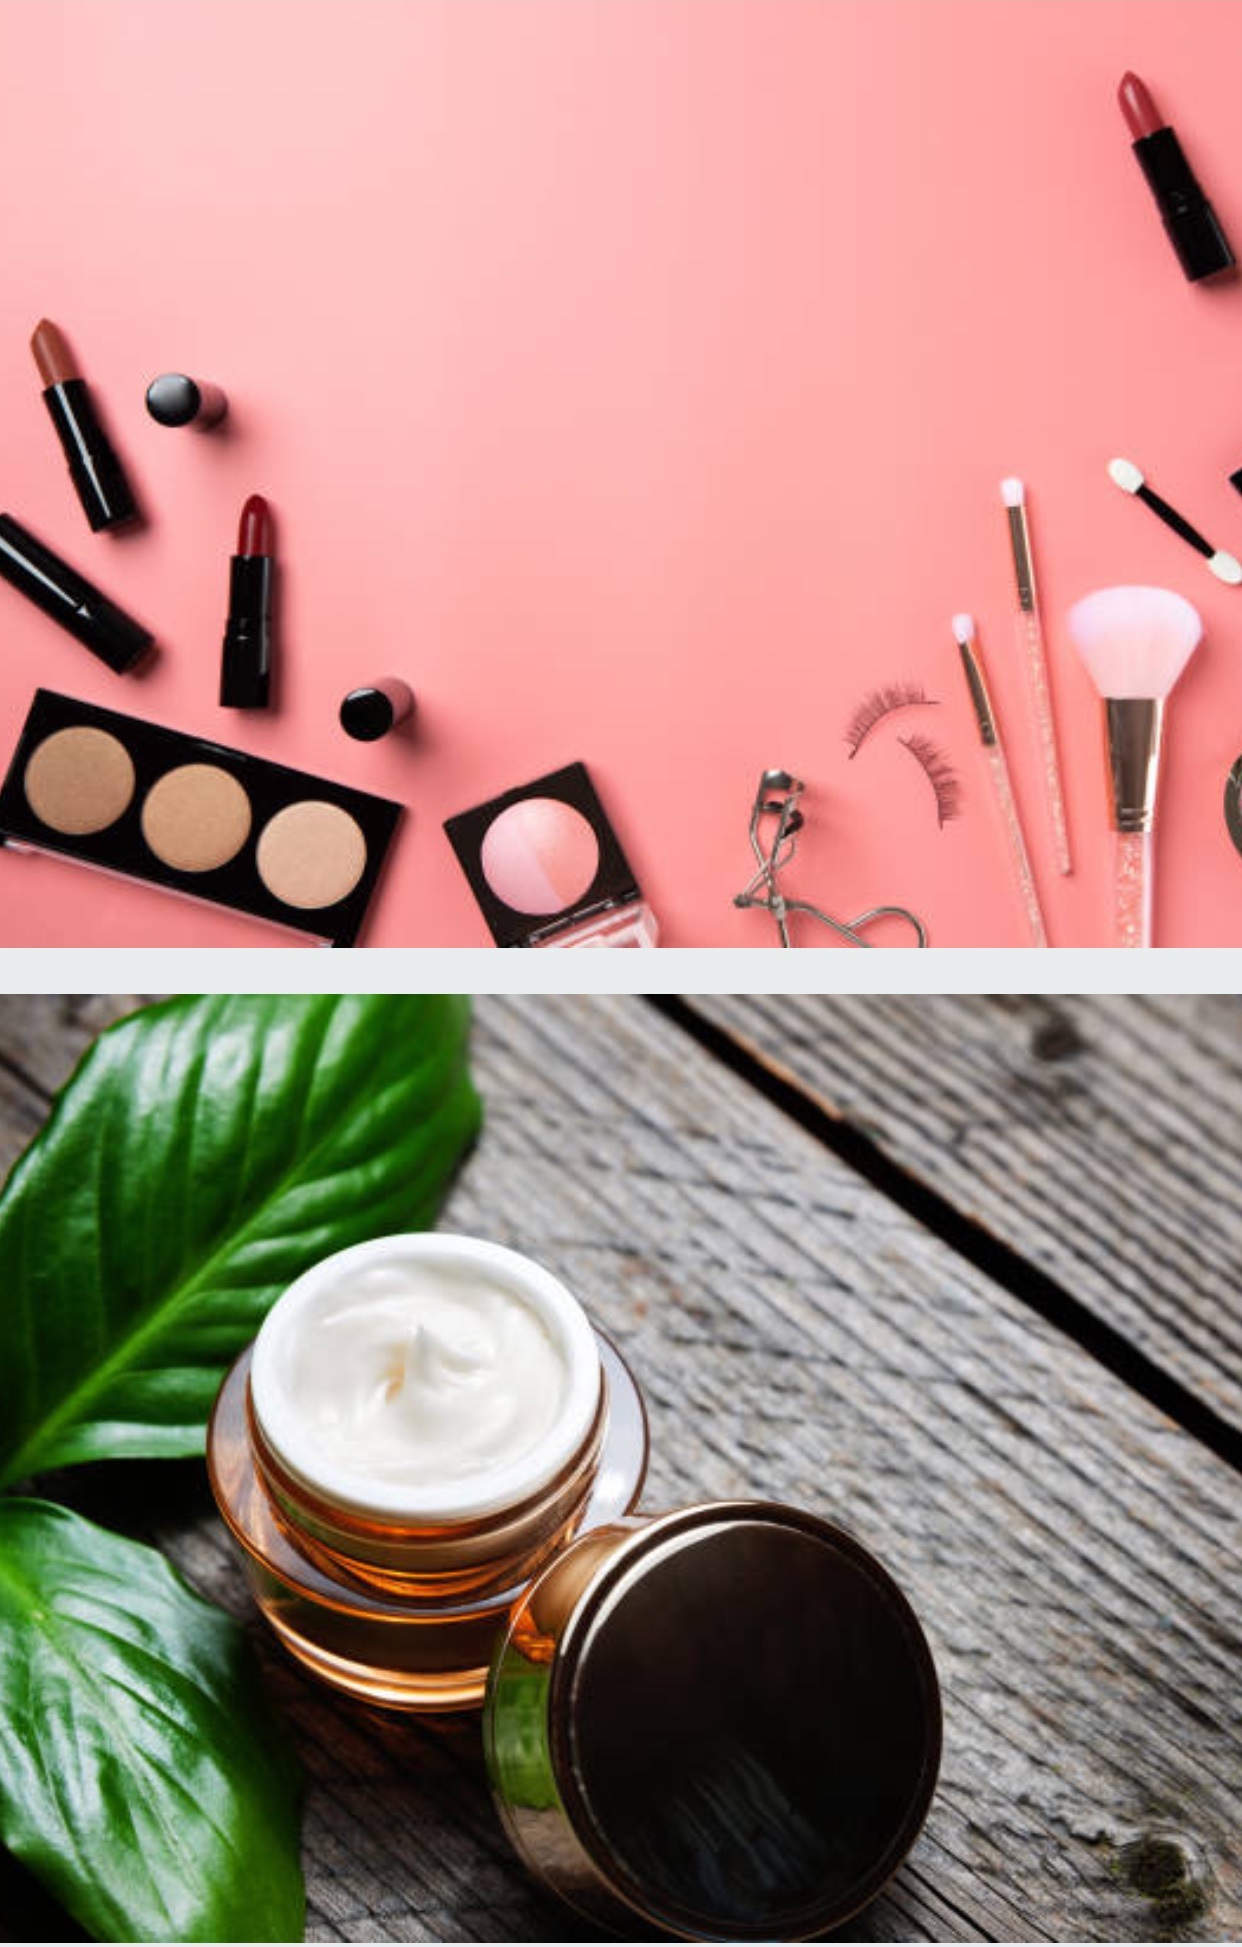 Beauty Products Online | Cosmetics & Fashion Accessories Online | Pircosmetics